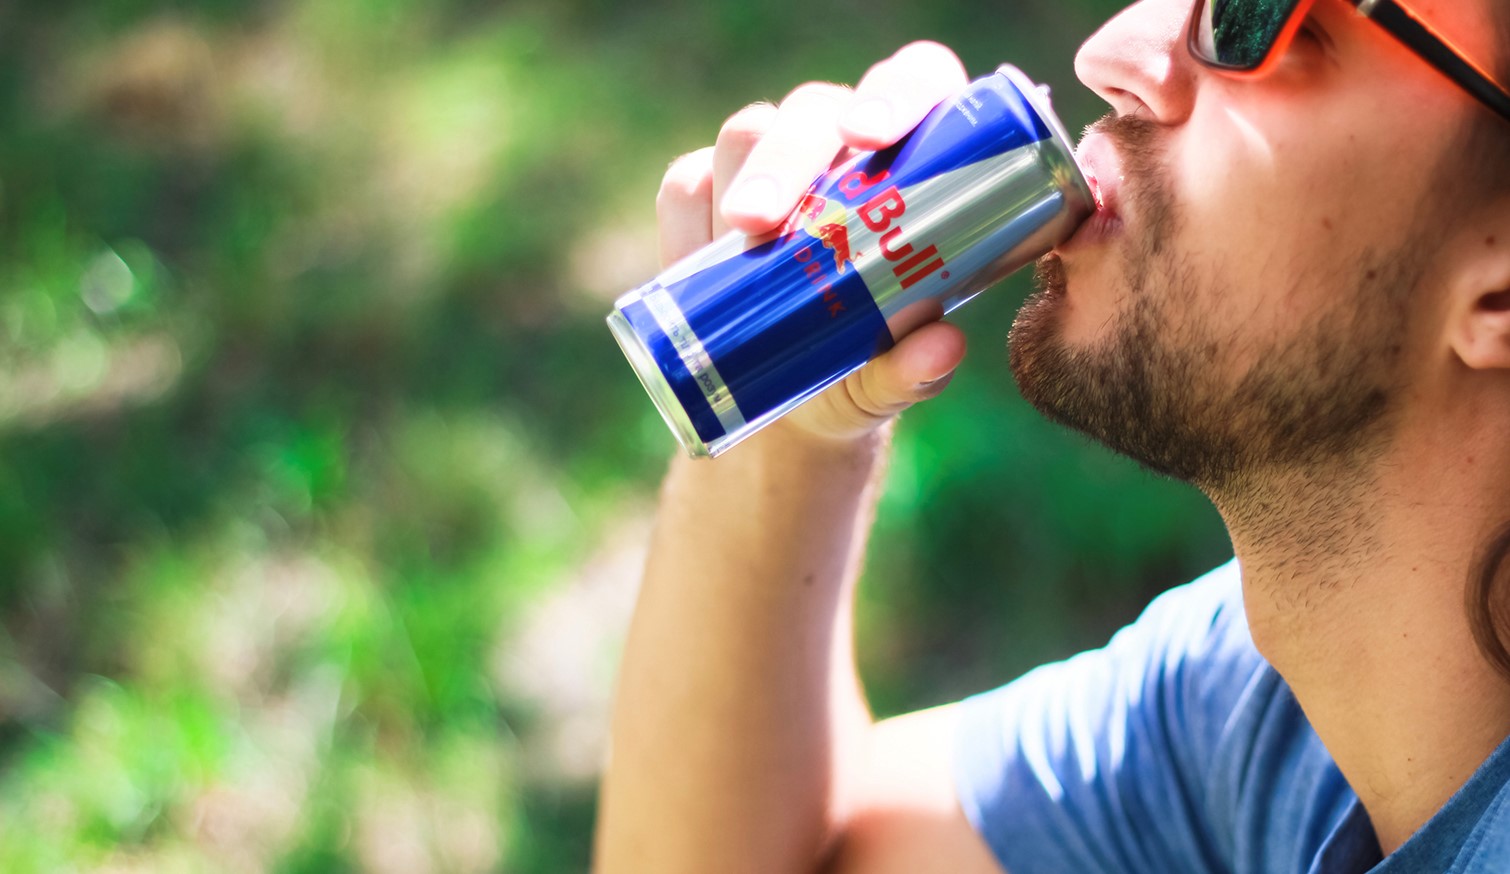 Most of us have some awareness of the correlation between lifestyle choices like smoking and lack of exercise on the risk of cardiac arrest. But did you know excessive energy drink consumption can also cause cardiac arrest?